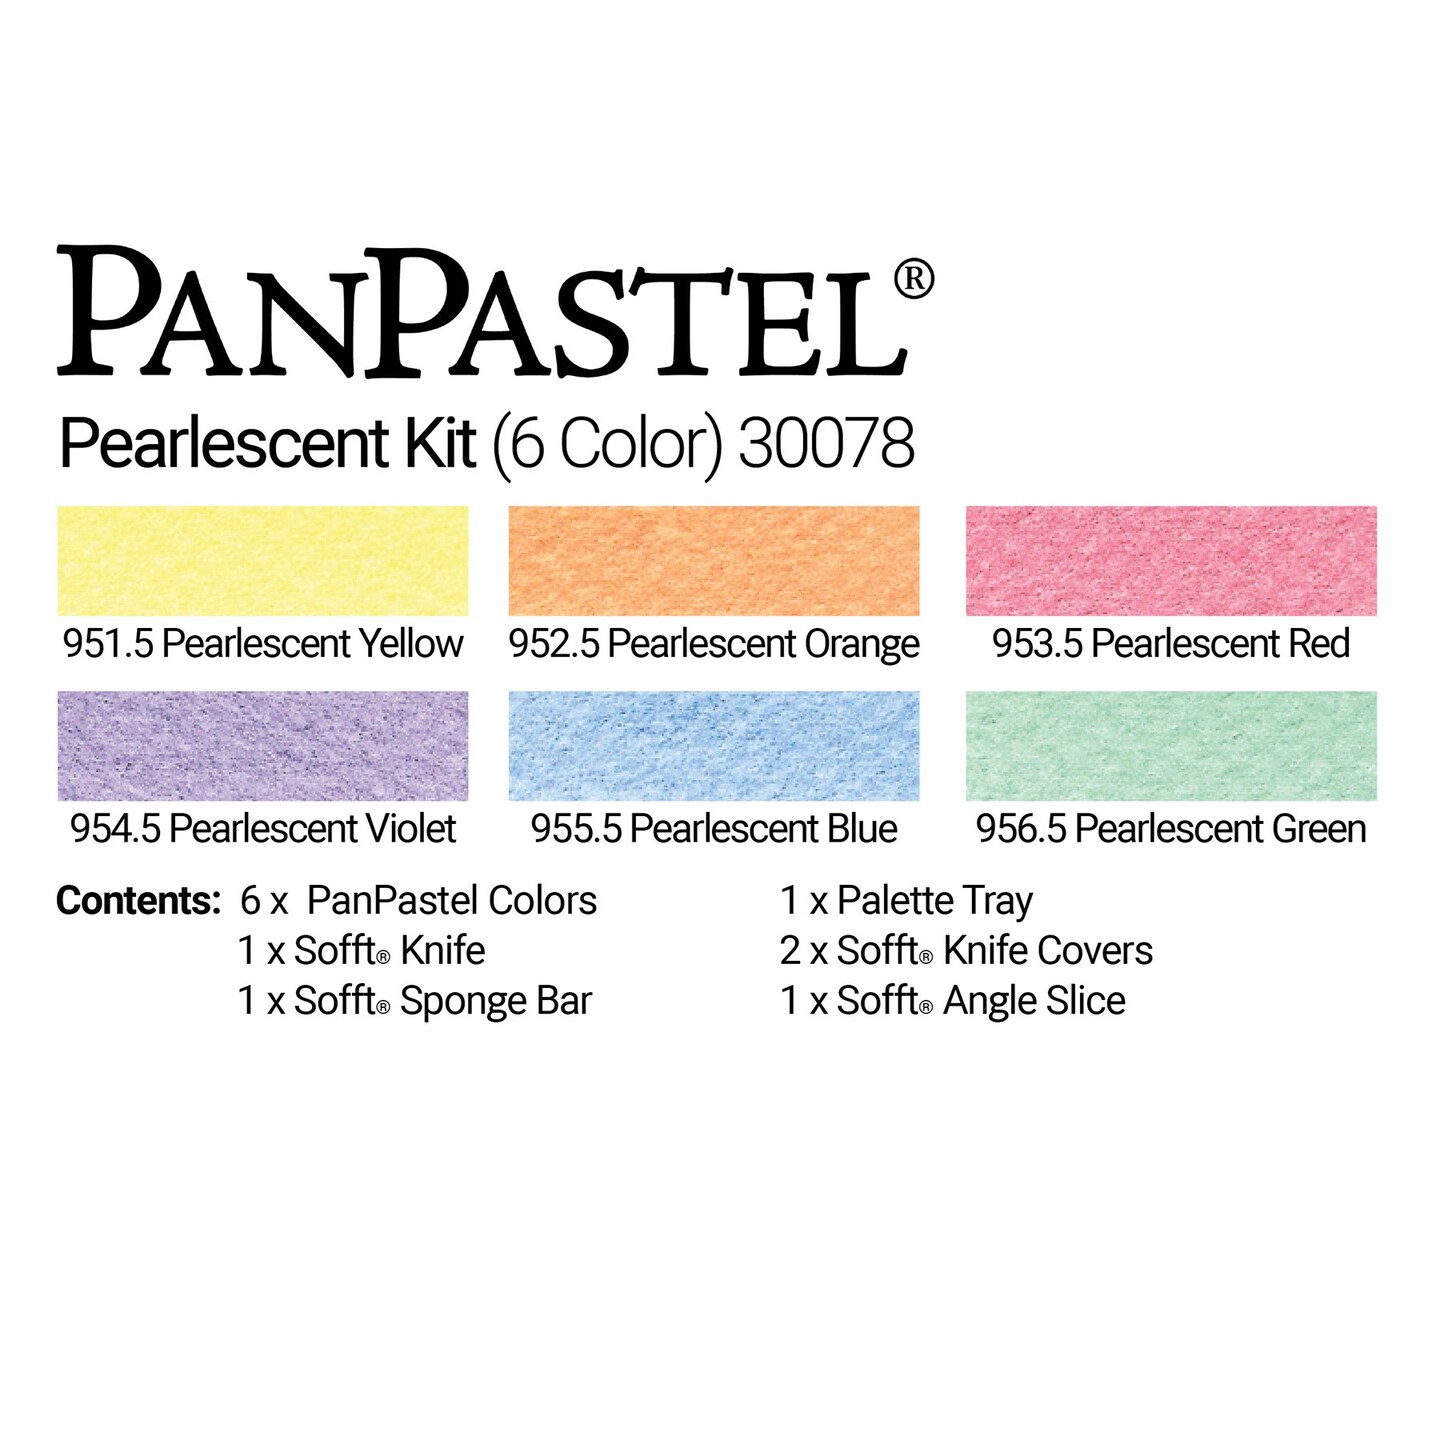 New PANPASTEL Ultra Soft Artists Painting Pastels Pans Pearlescent Metallic  Sets